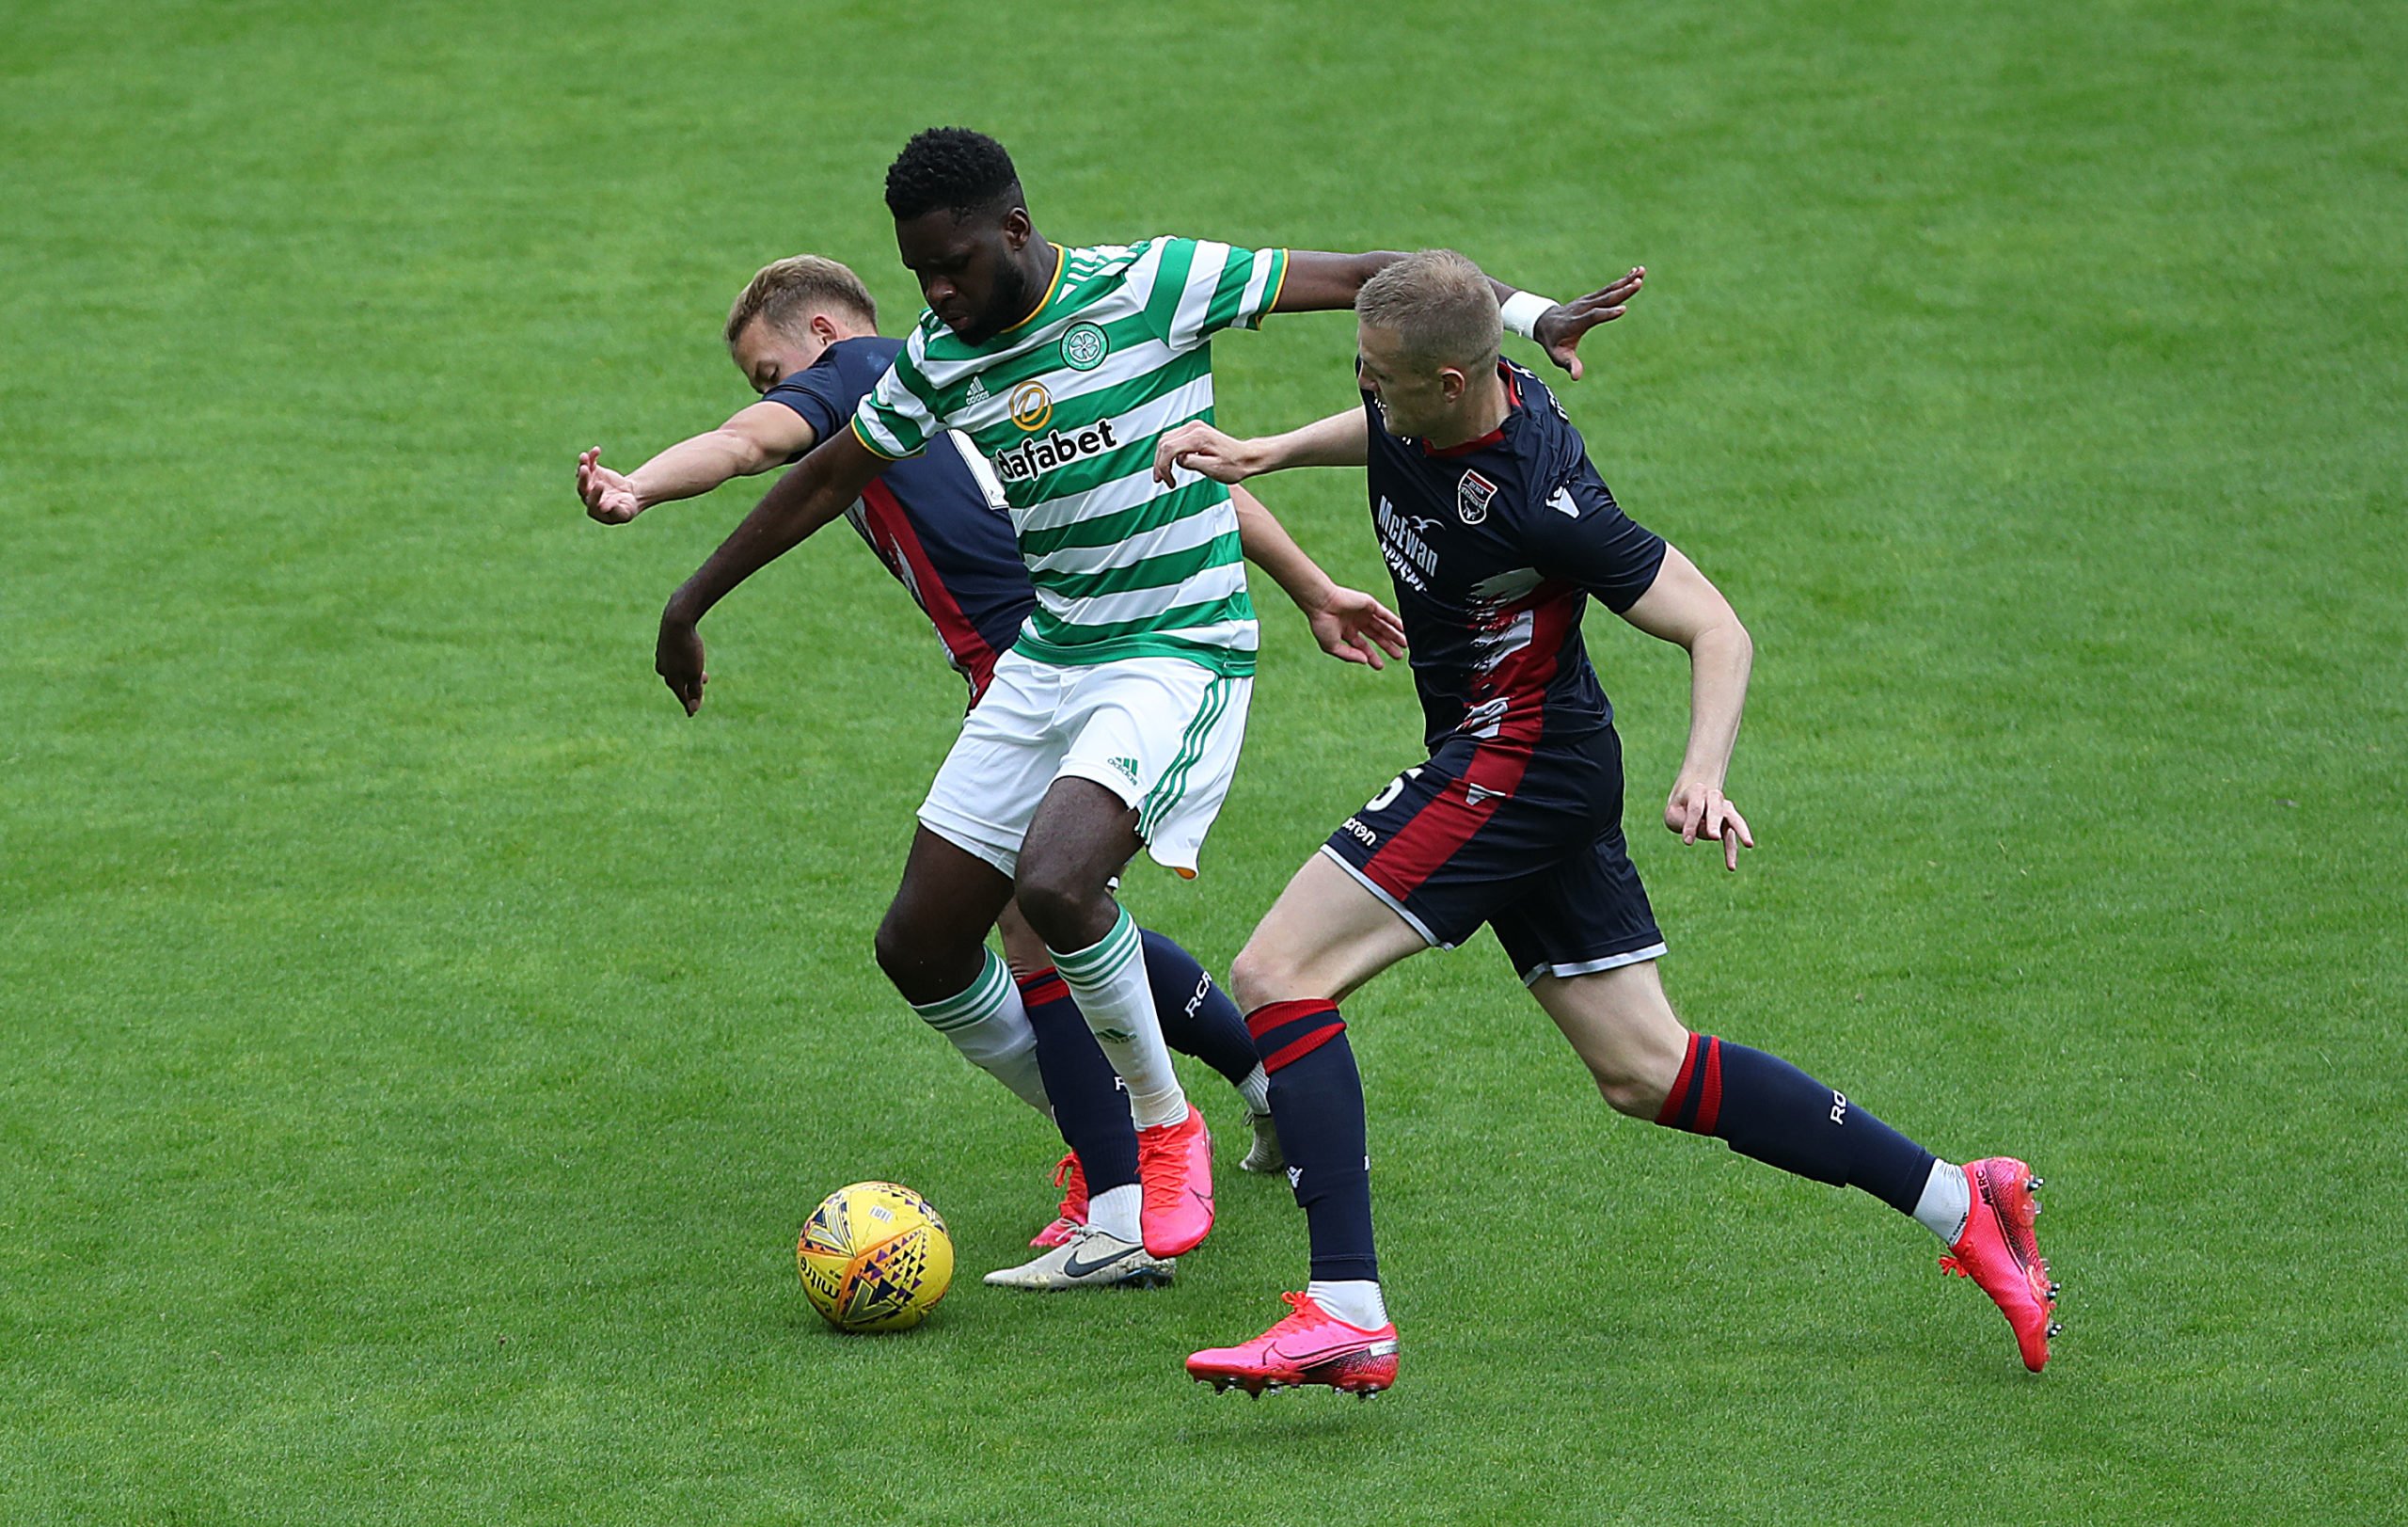 Report: Celtic will demand at least £40m if someone wants Edouard